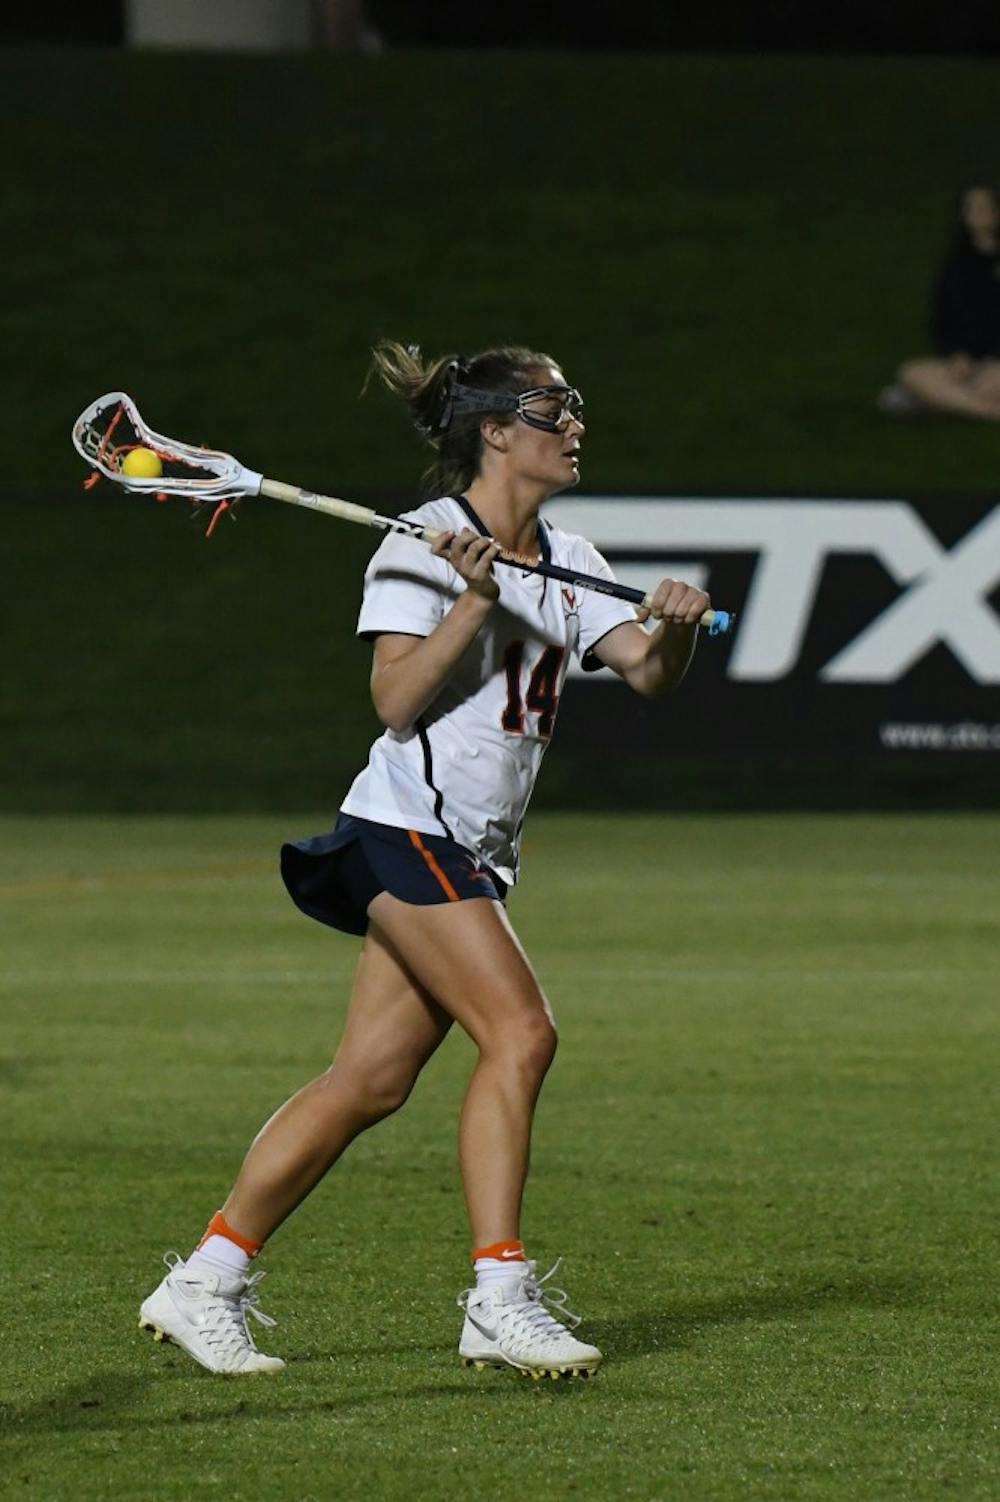 <p>Sophomore midfielder Maggie Jackson has scored nine goals in the past two games. Jackson is also known for her defensive skills, as she earned ACC Defensive Player of the Week honors.&nbsp;</p>